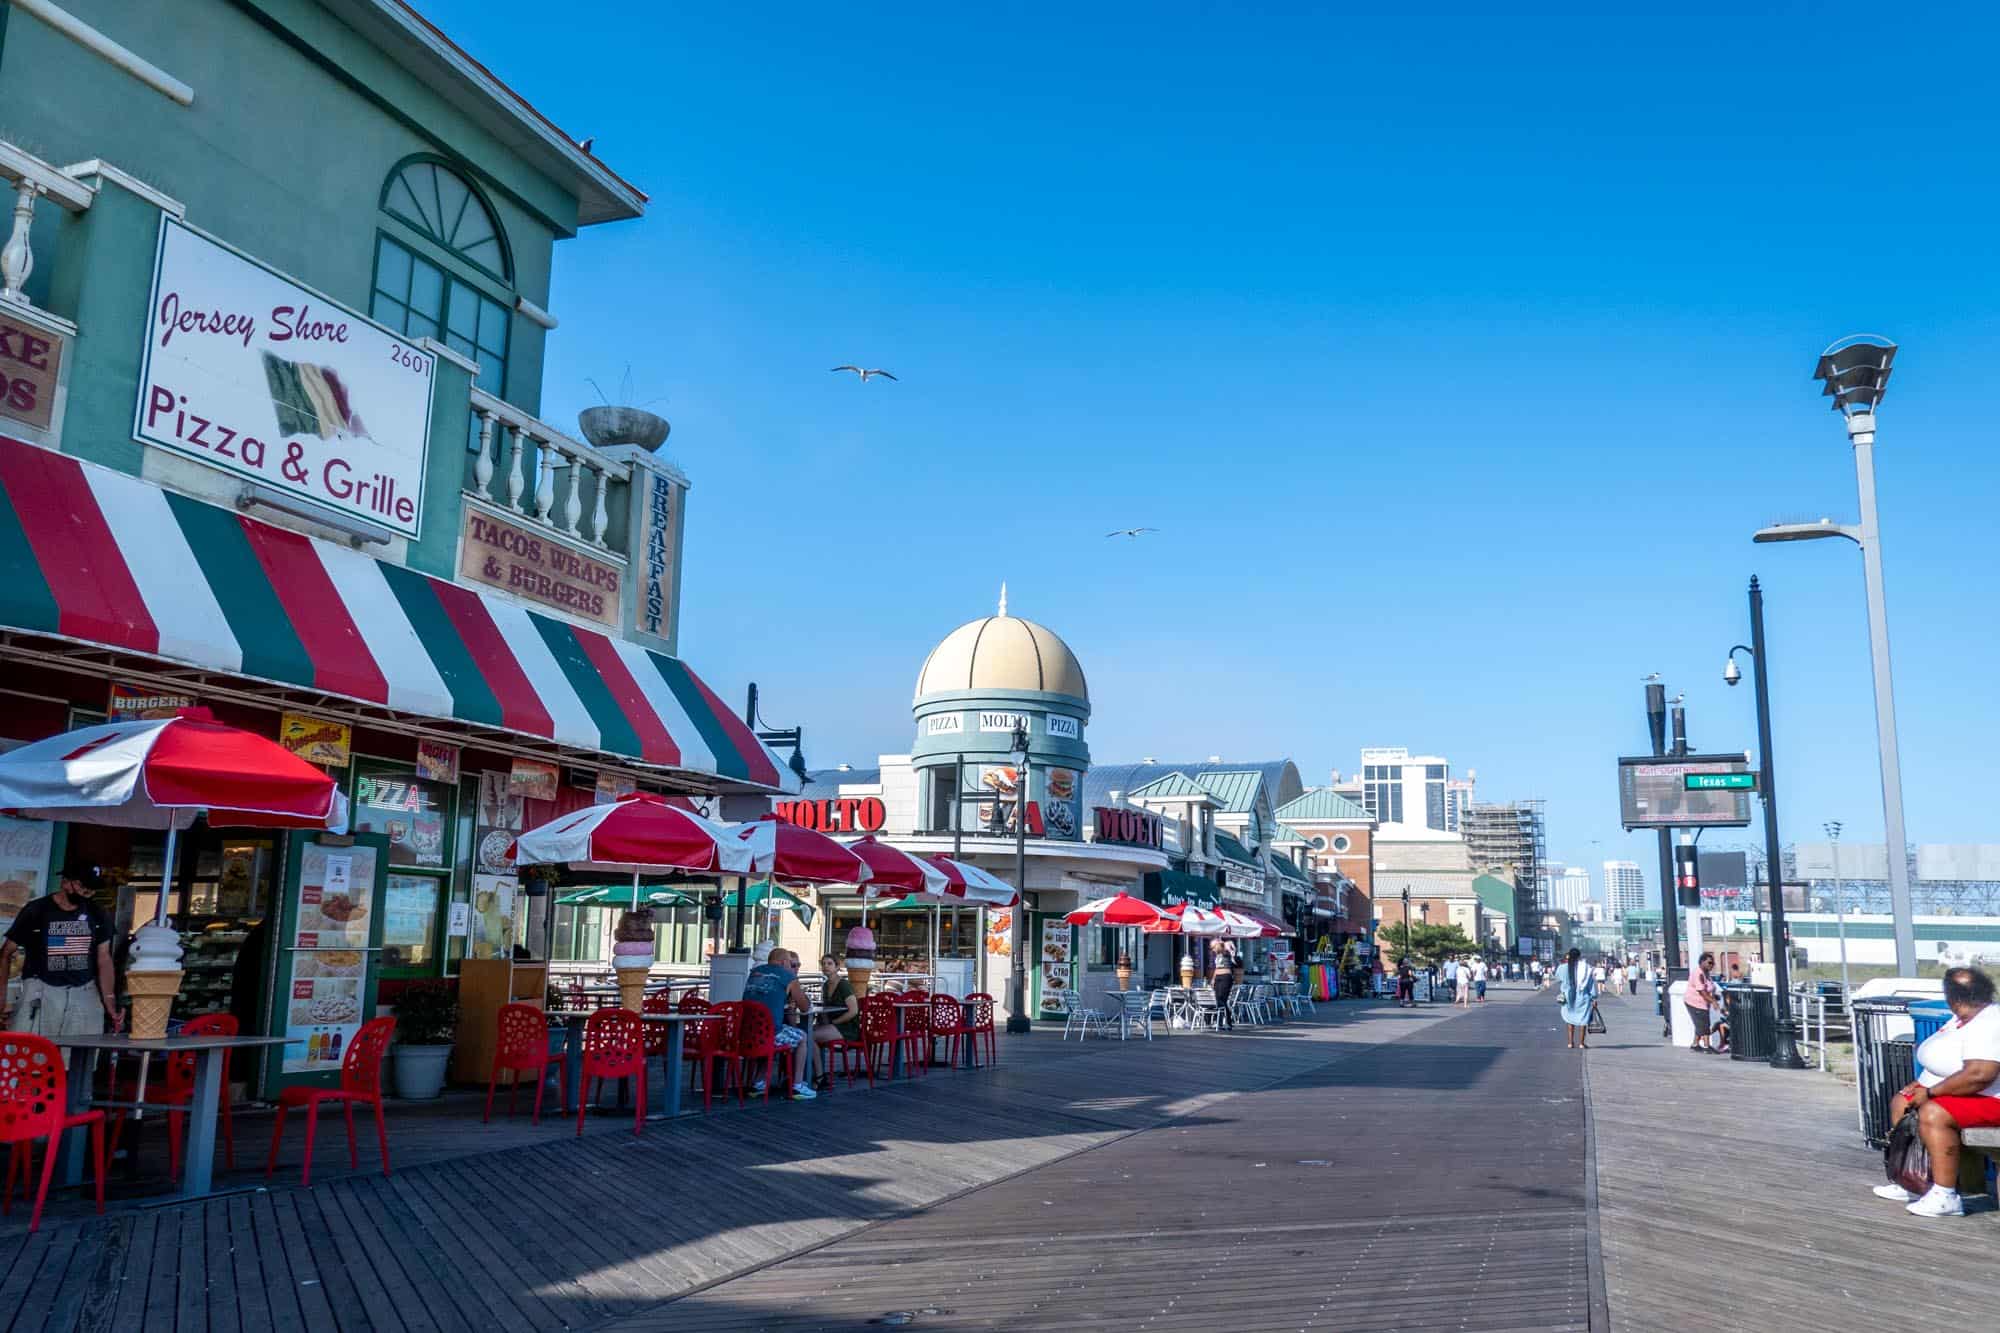 Boardwalk in Atlantic City NJ lined with restaurants and buildings